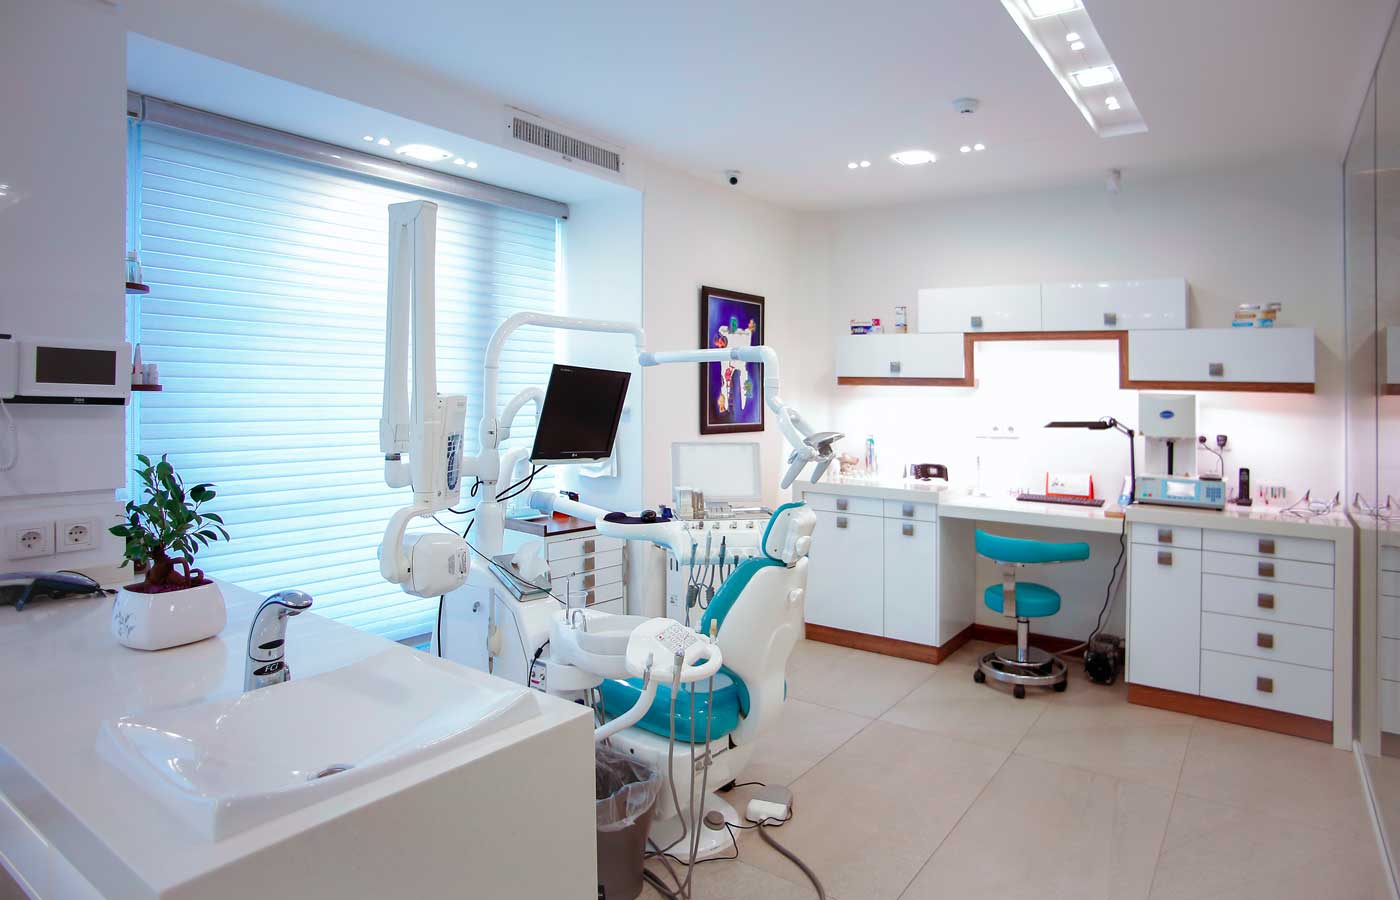 Dental Nurse Indemnity Insurance - Shows the interior of a dental surgery